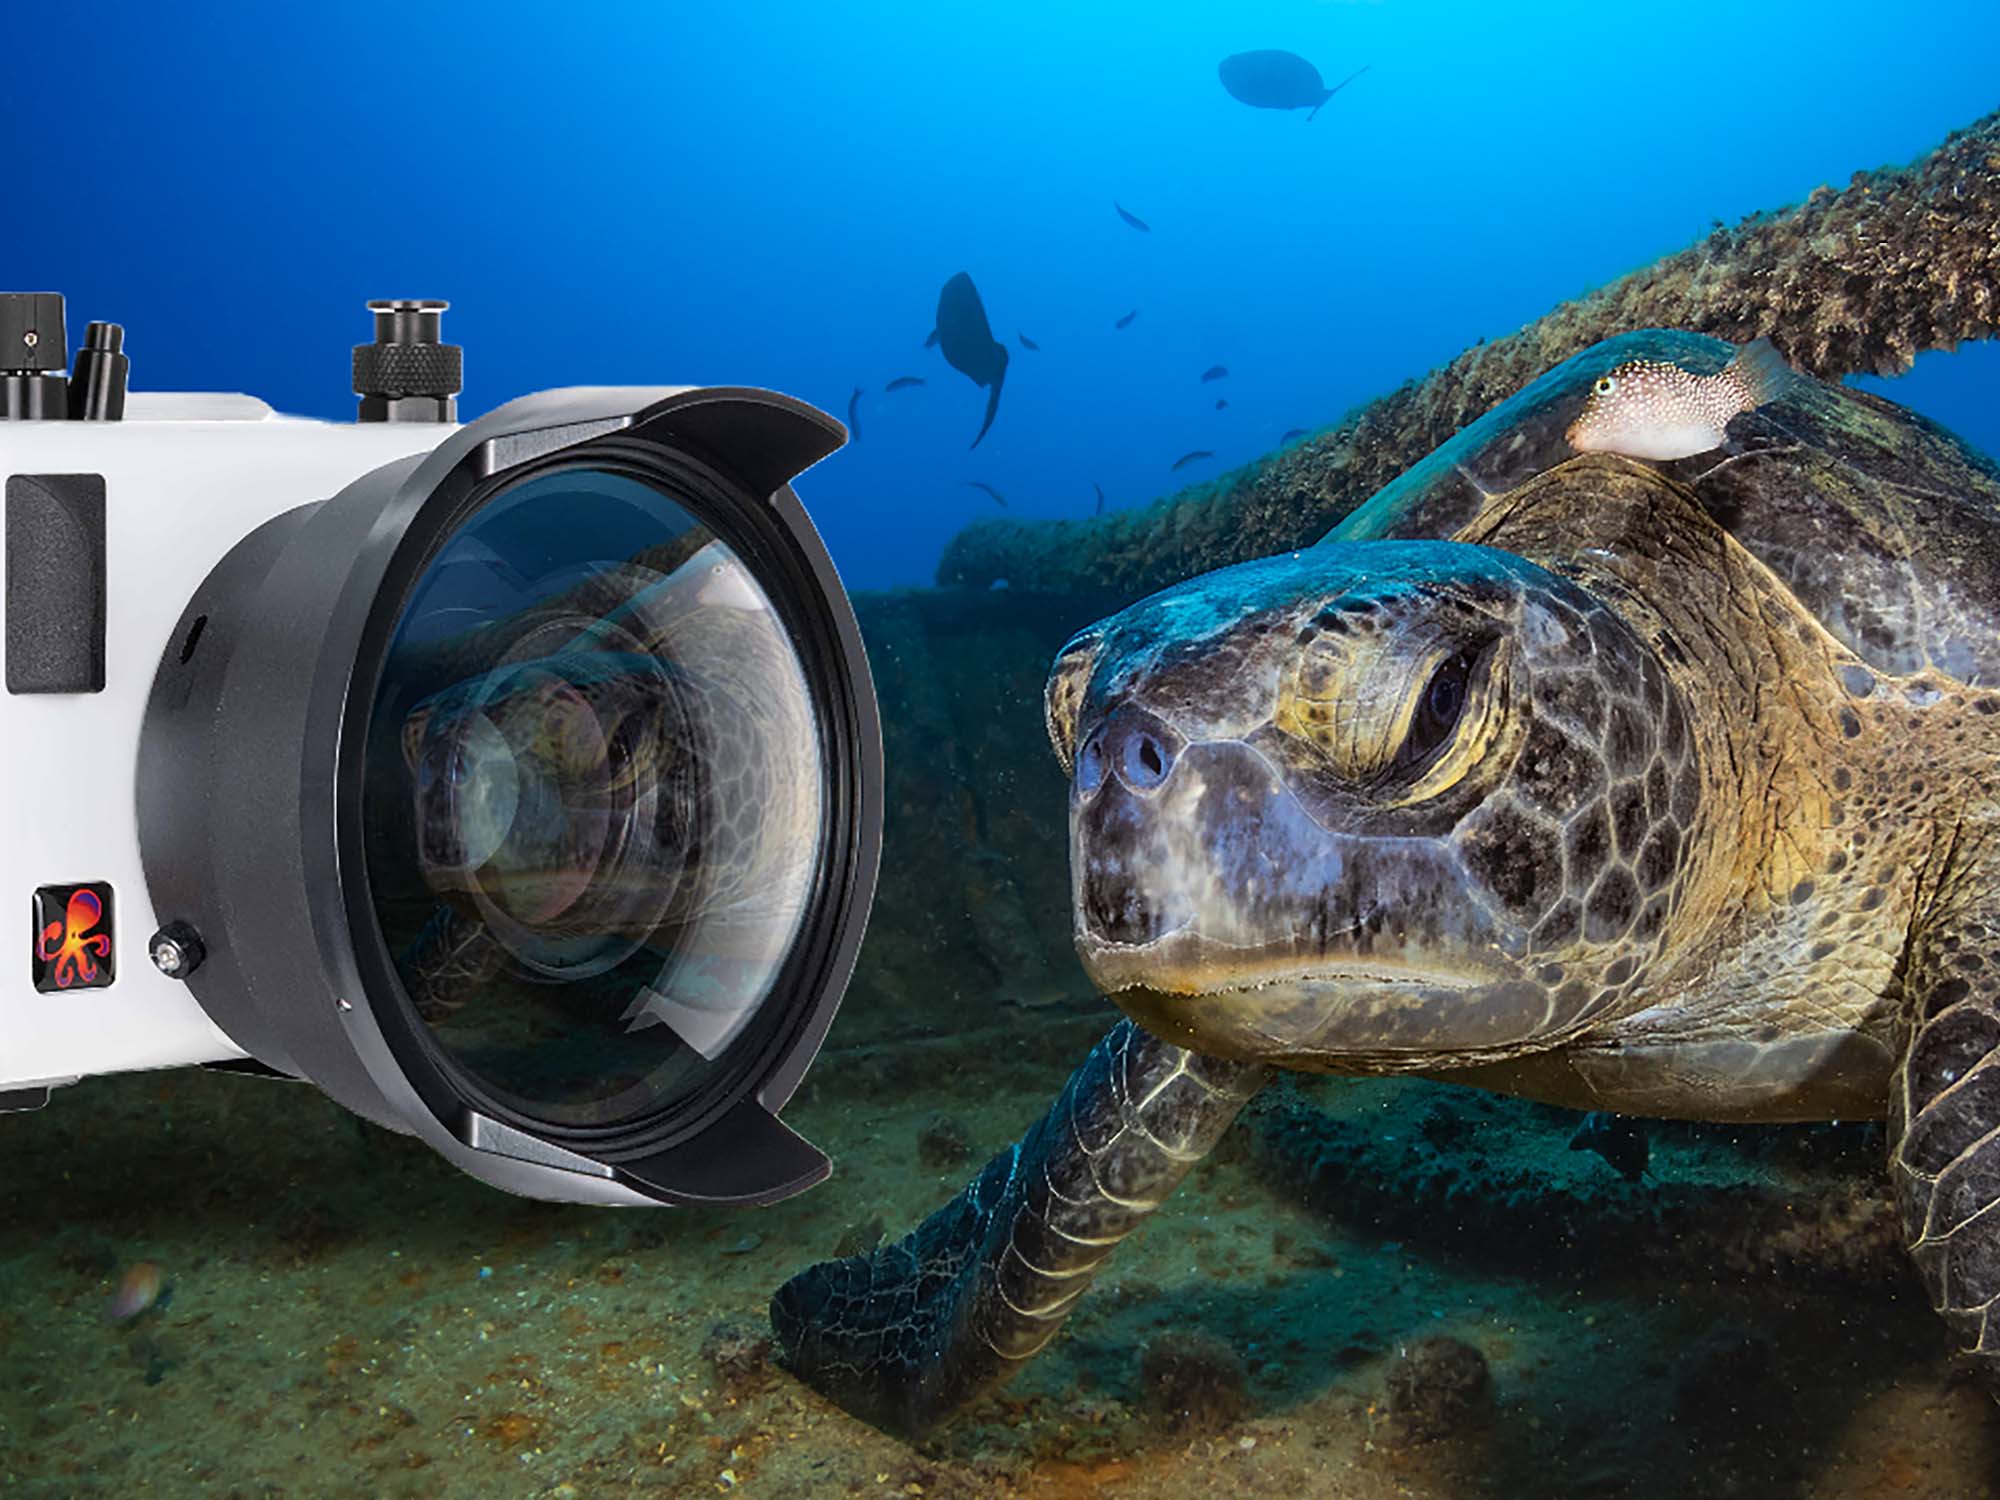 The BEST Entry-Level Compact Camera Housing Underwater Right NOW!